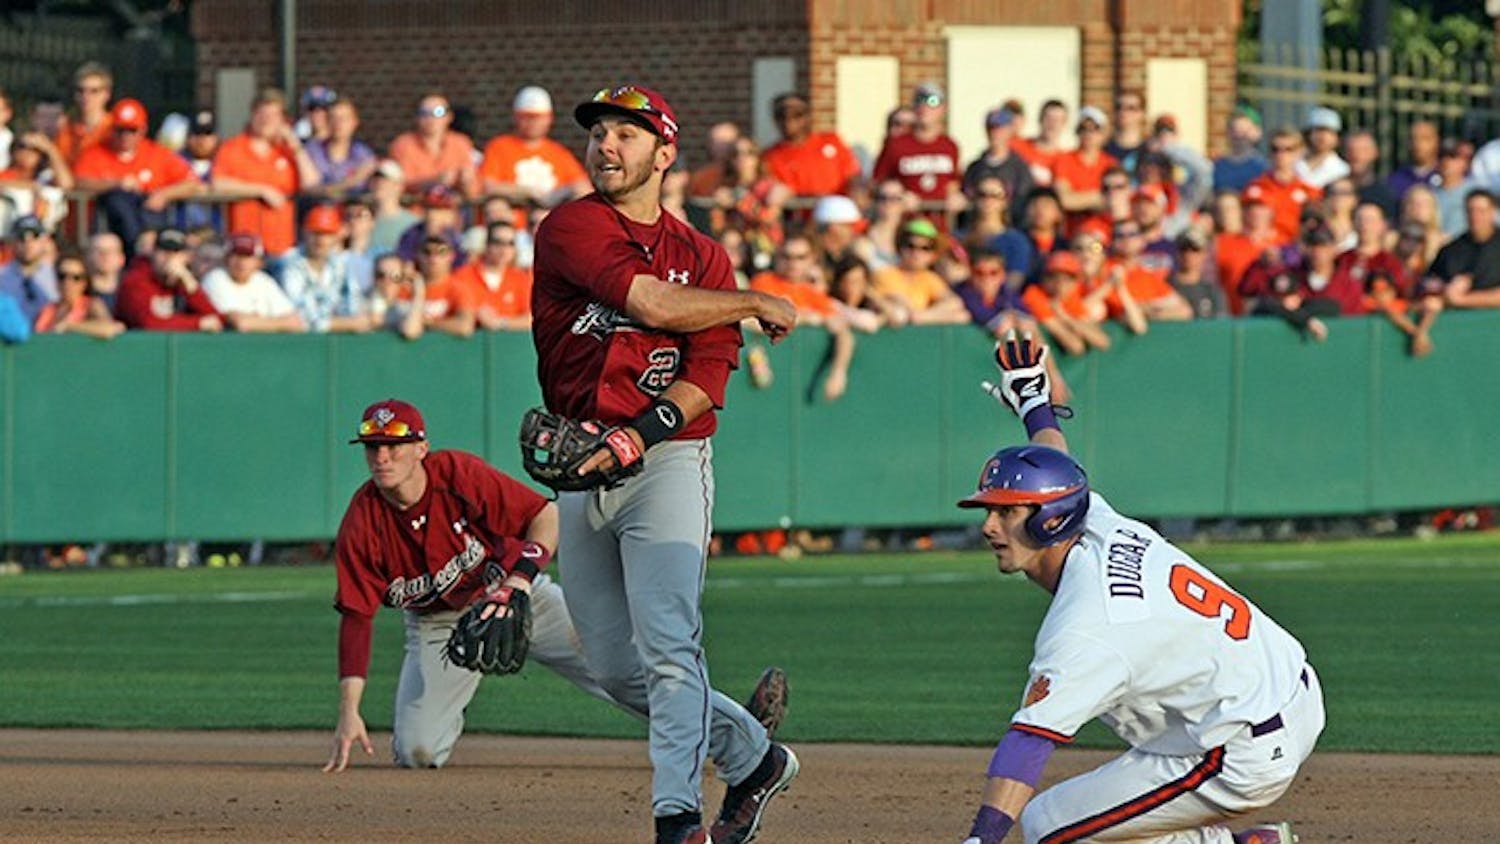 South Carolina Gamecocks&apos; Max Schrock completes a double play against Clemson at Doug Kingsmore Stadium in Columbia, S.C., on Sunday, March 2, 2014. (Dwayne McLemore/The State/MCT)